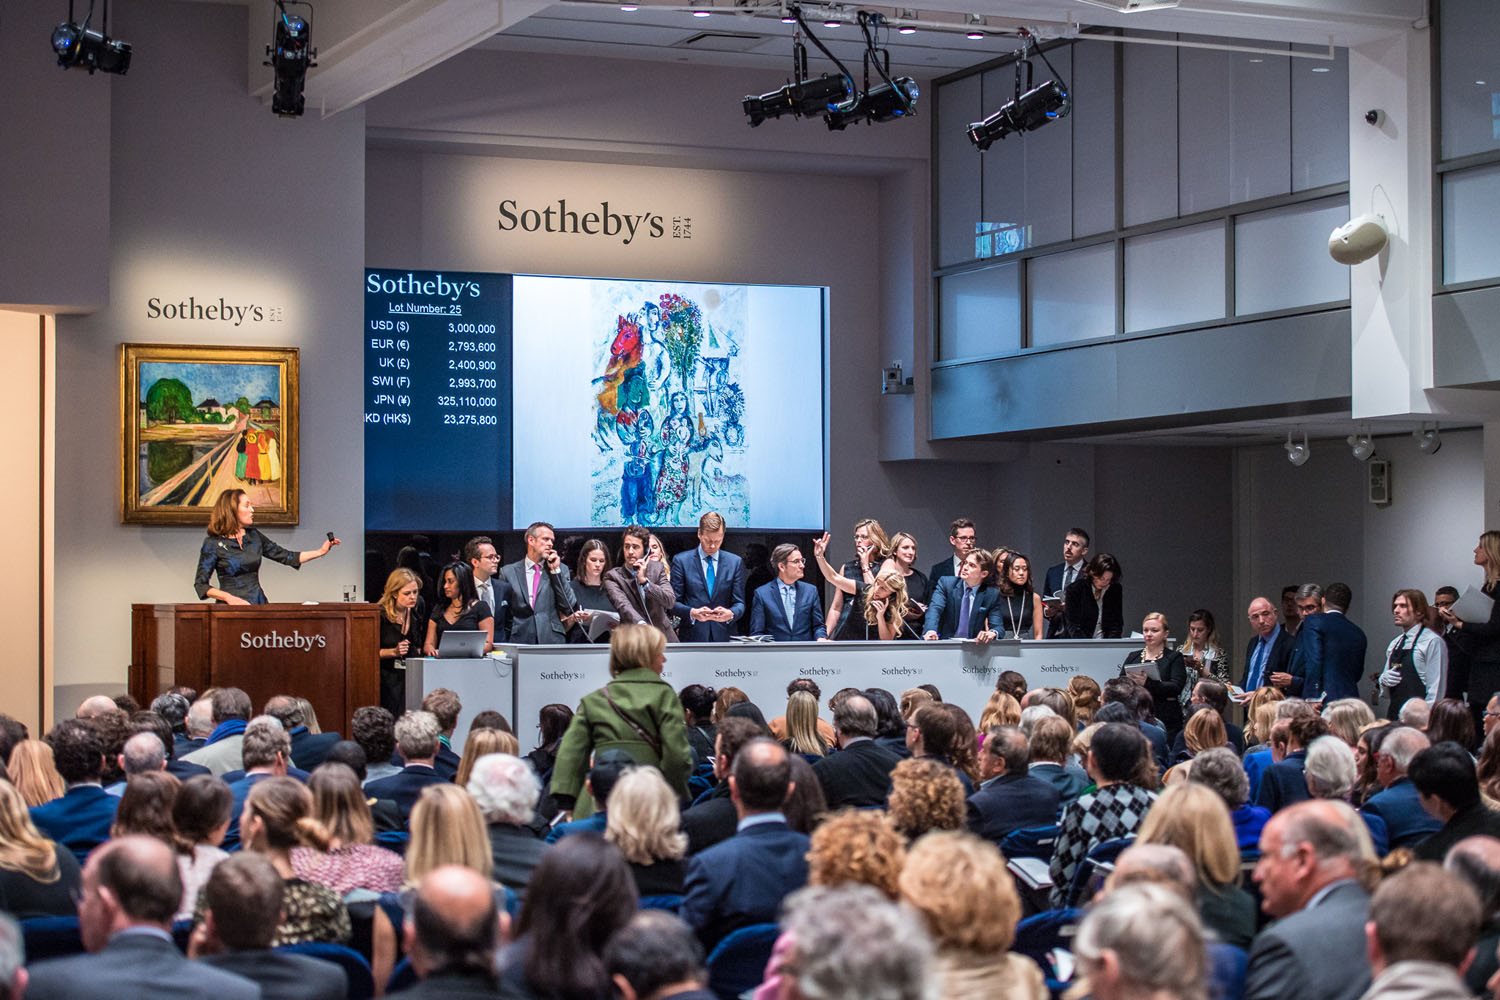 Sotheby's International Auction House